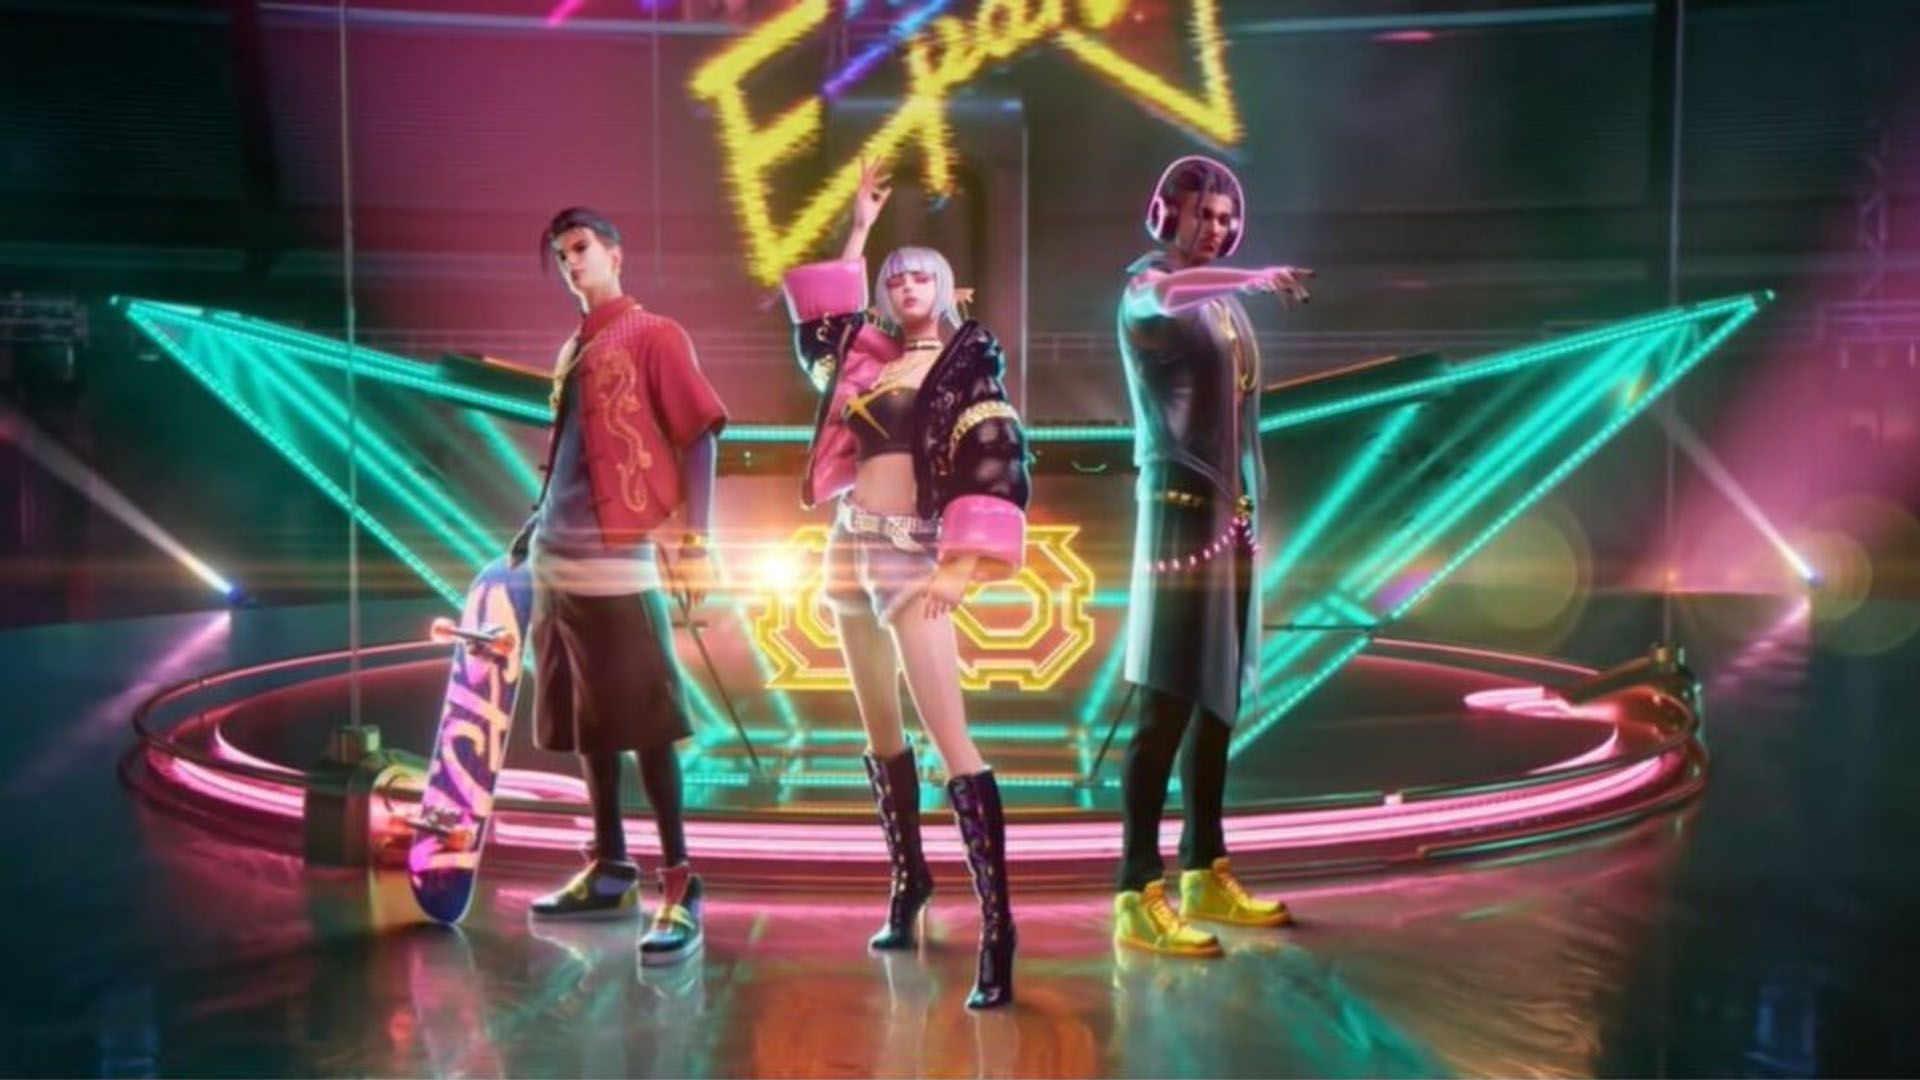 Eparty Song 'Together' Is MLBB's Best Music Video So Far